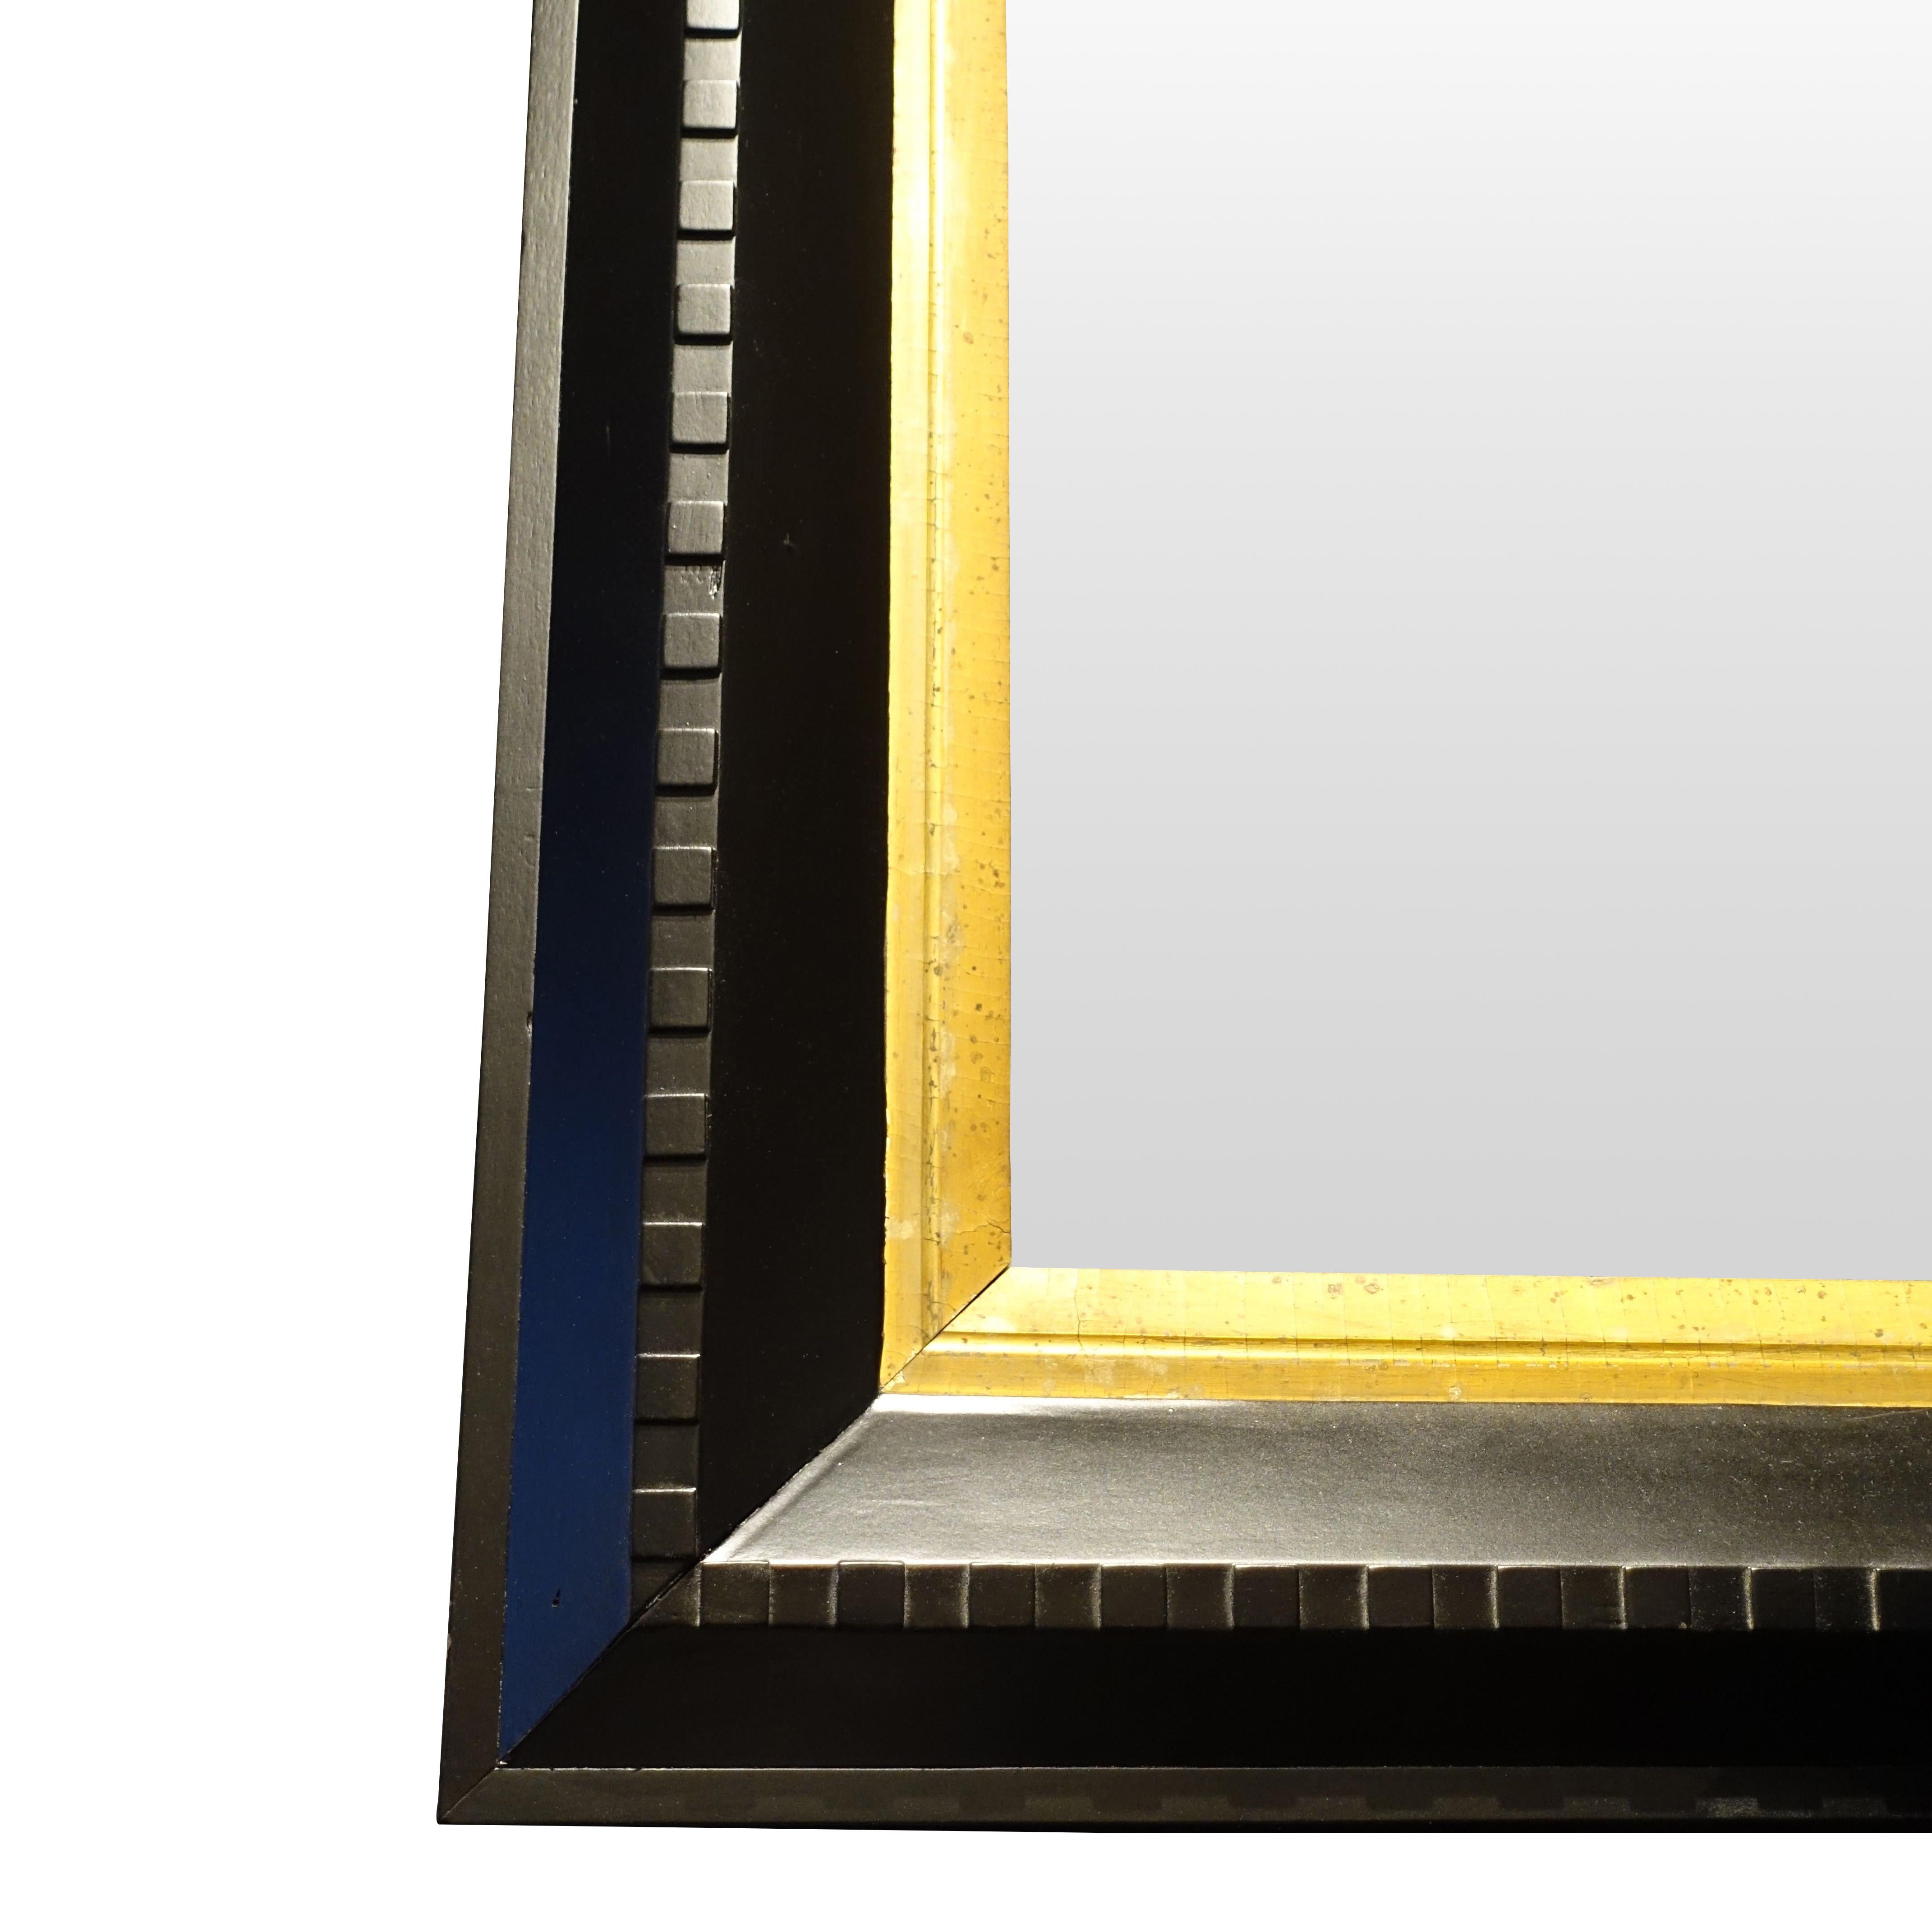 French 19th century black mirror with dental molding design. The inner moldings have a gold gild finish. Each mirror has original mercury glass.
